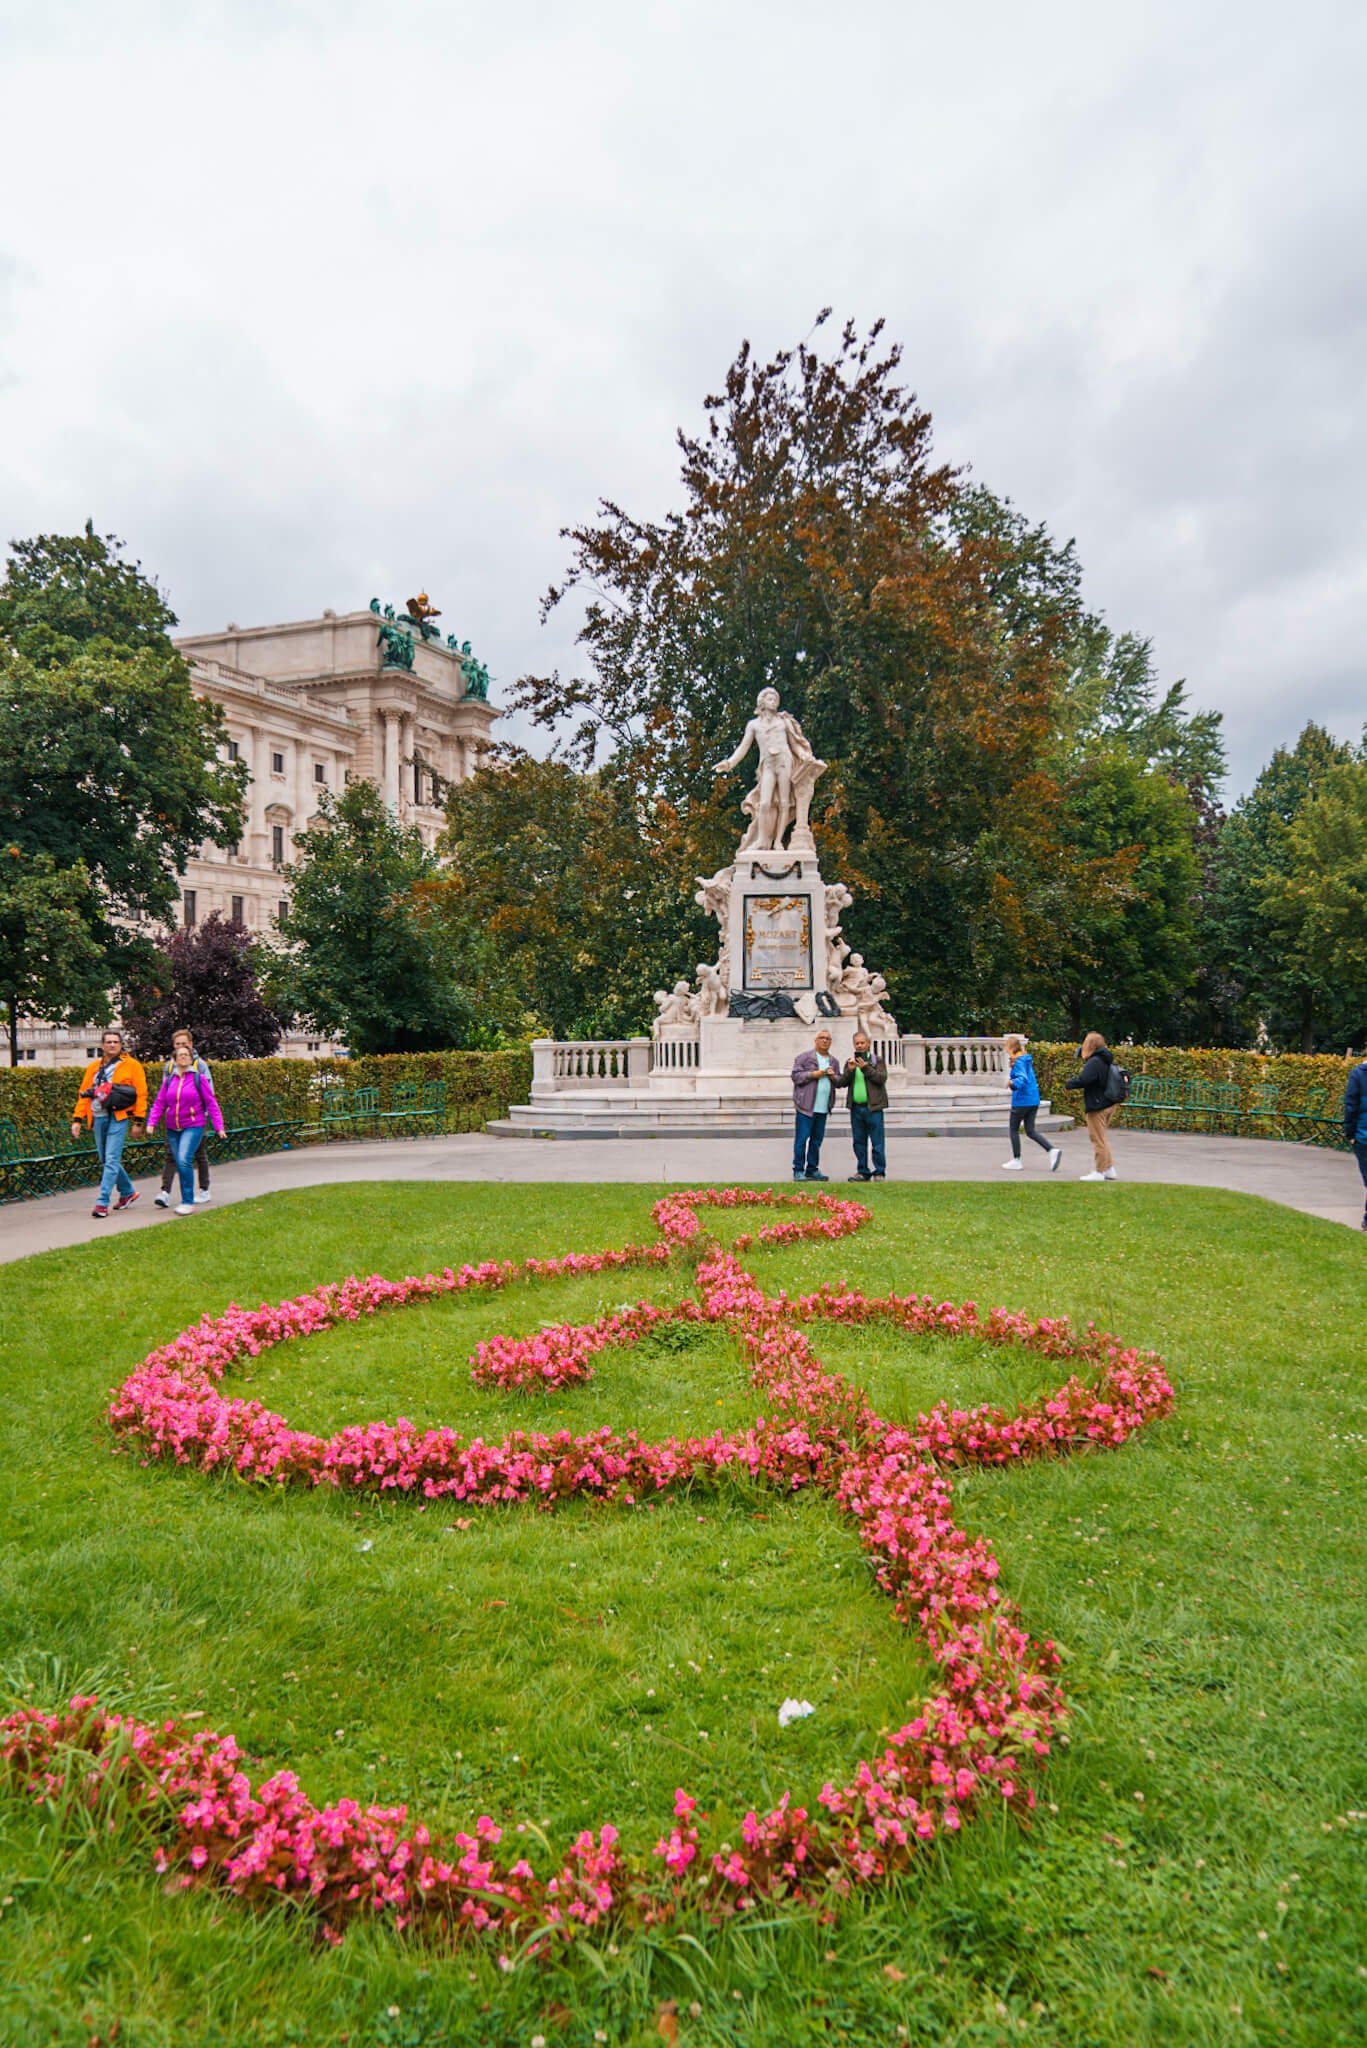 Mozart statue, things to do in Vienna